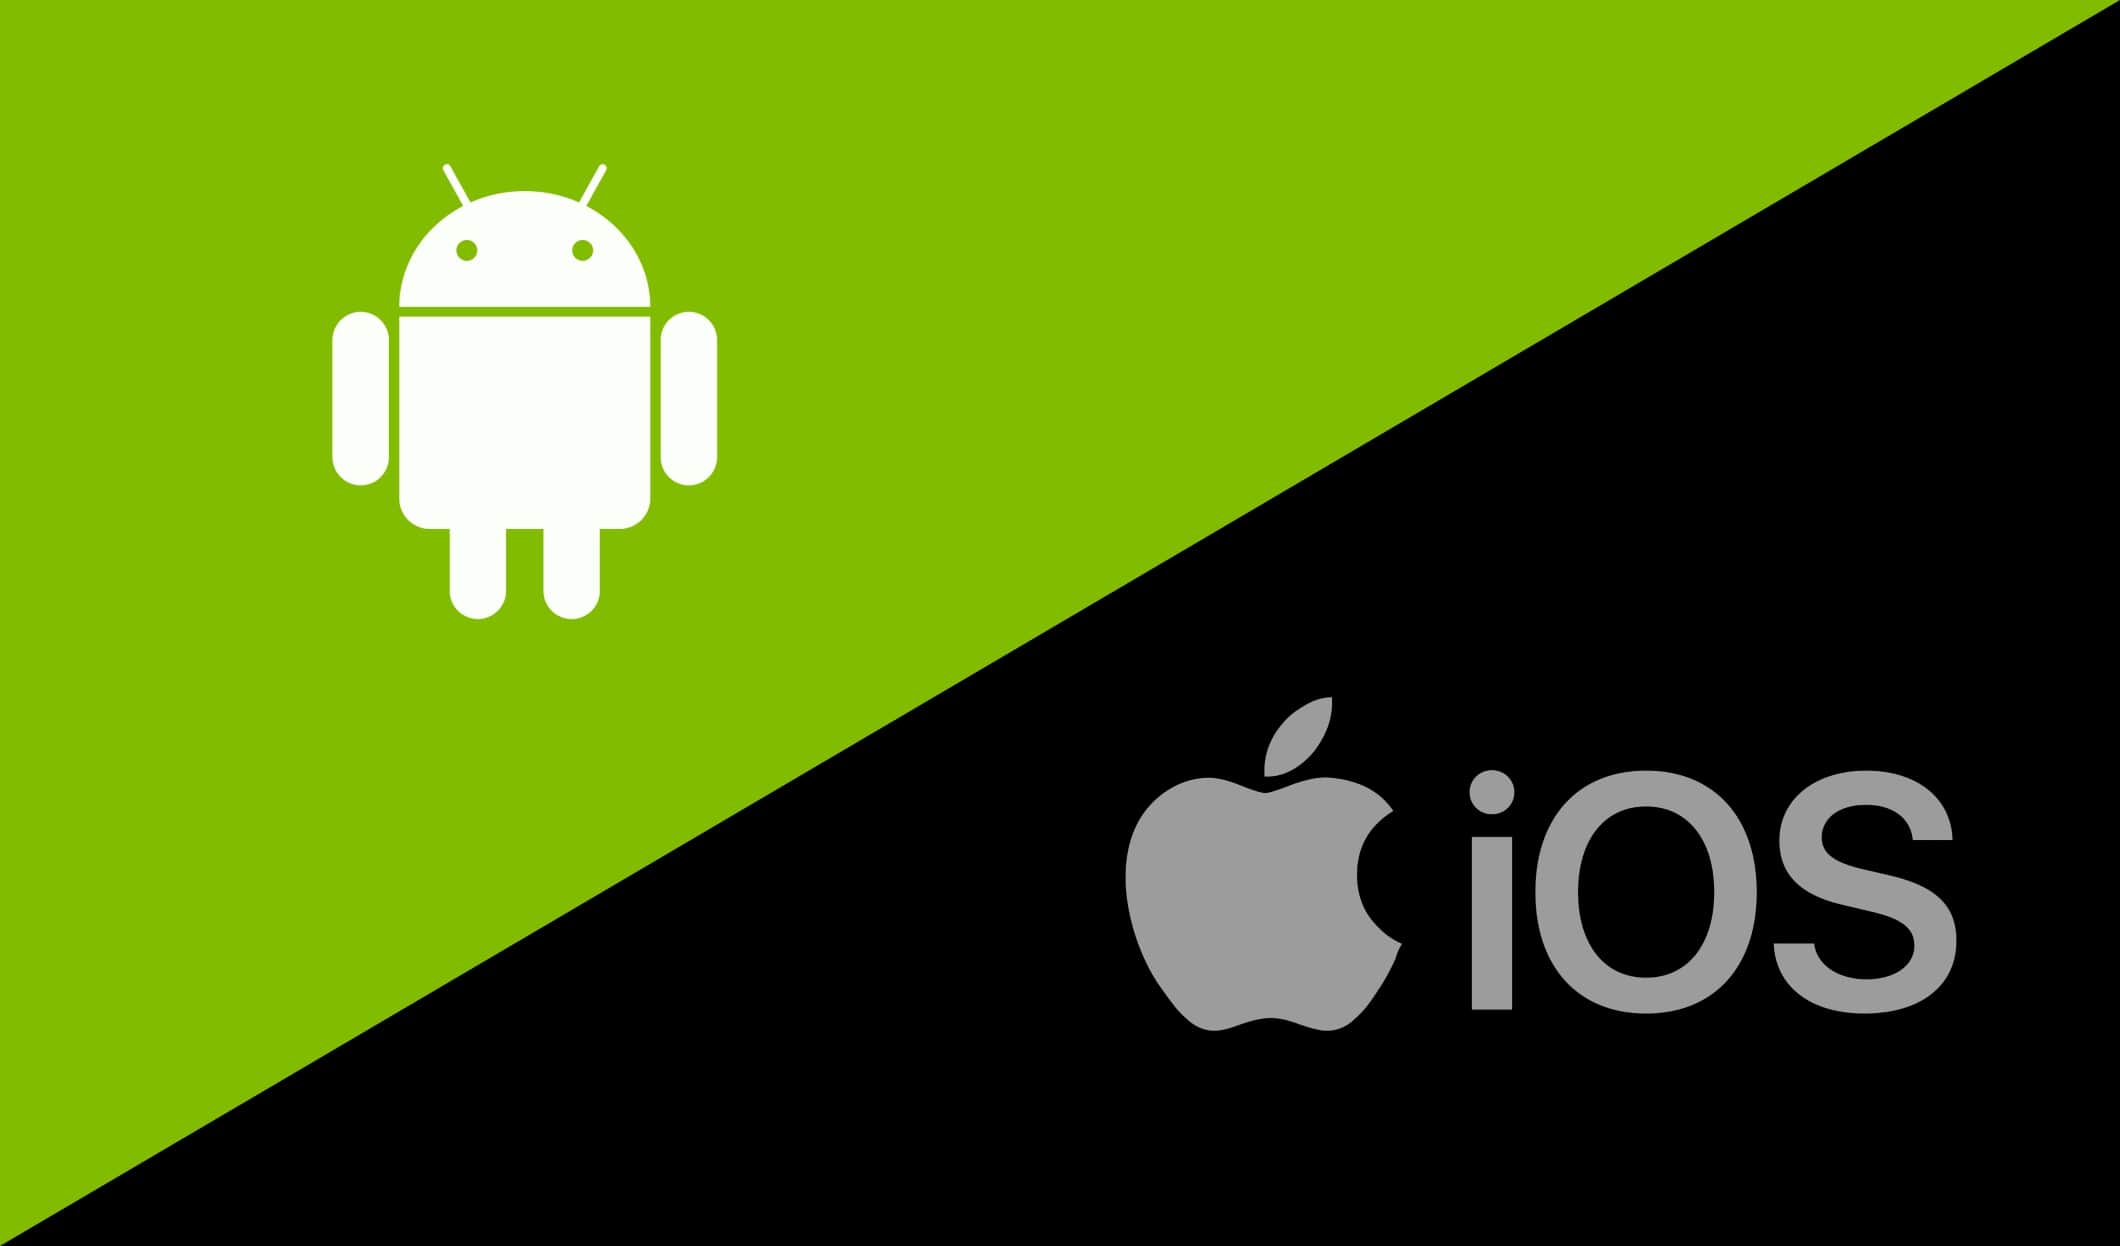 Android vs iOS: App UI Design Differences and Comparison